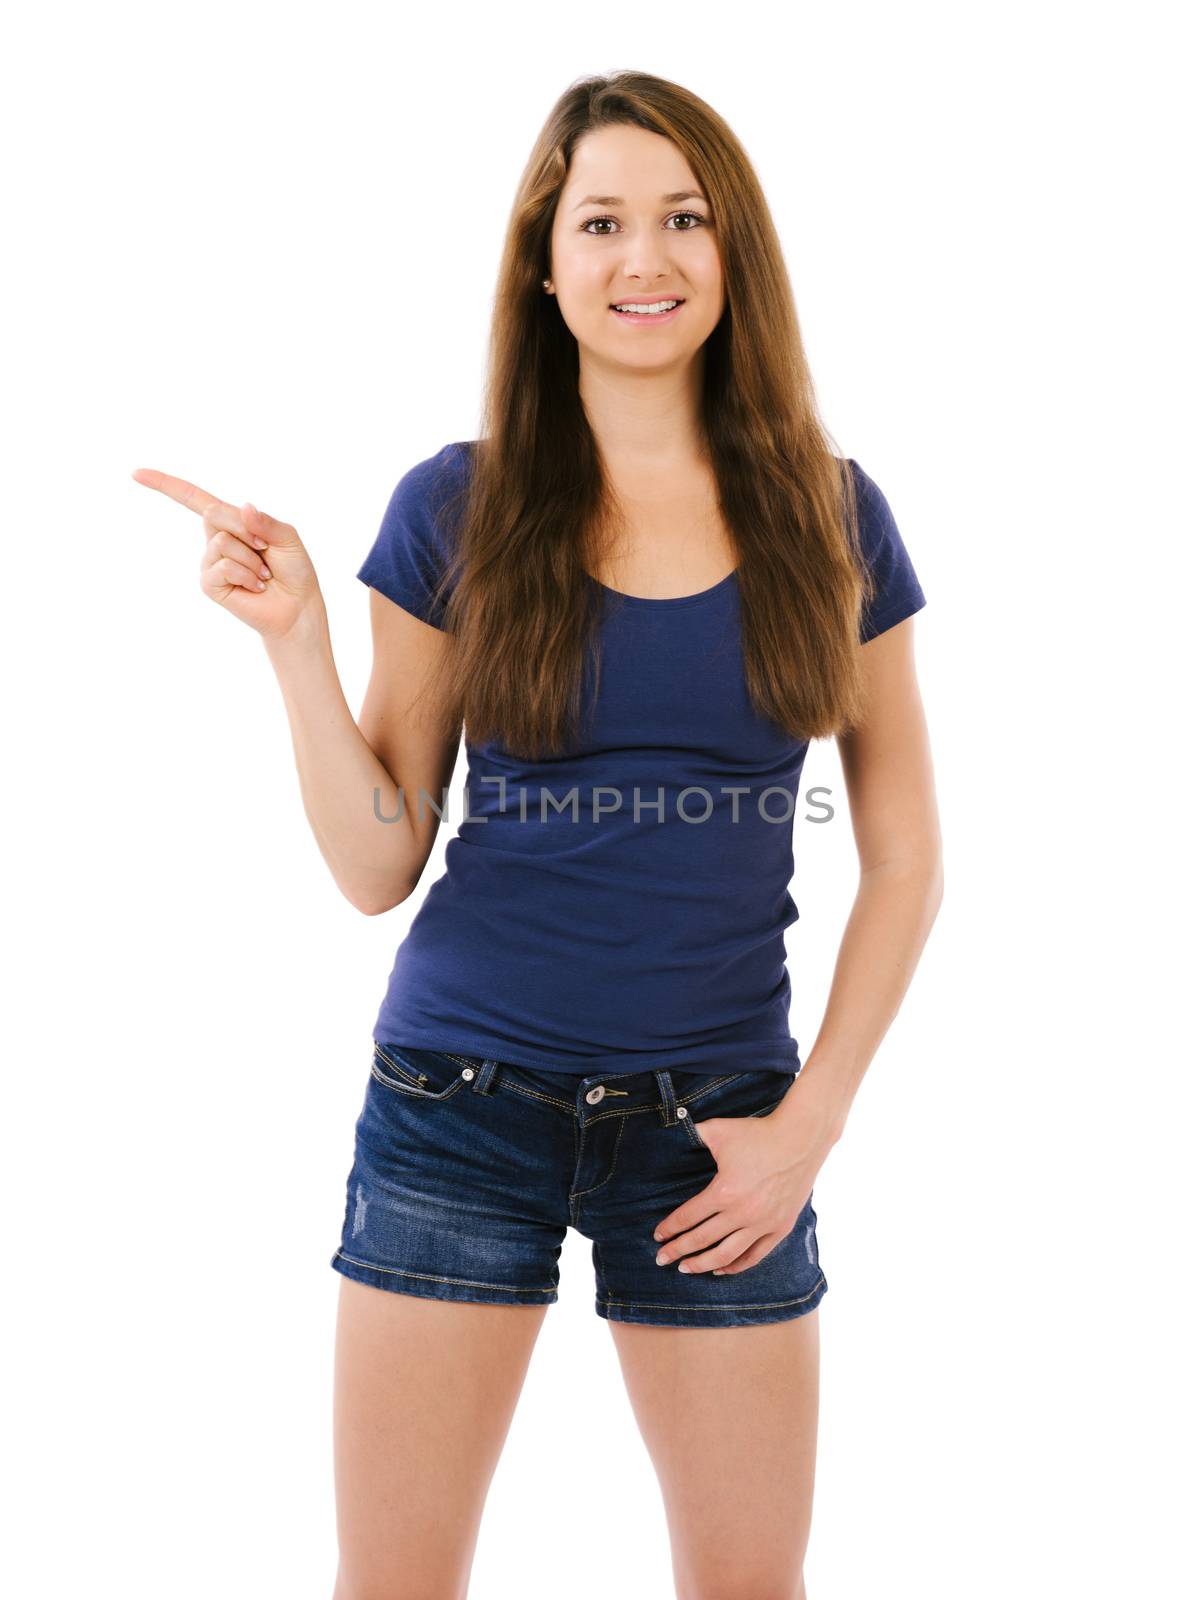 Beautiful woman pointing with right hand by sumners